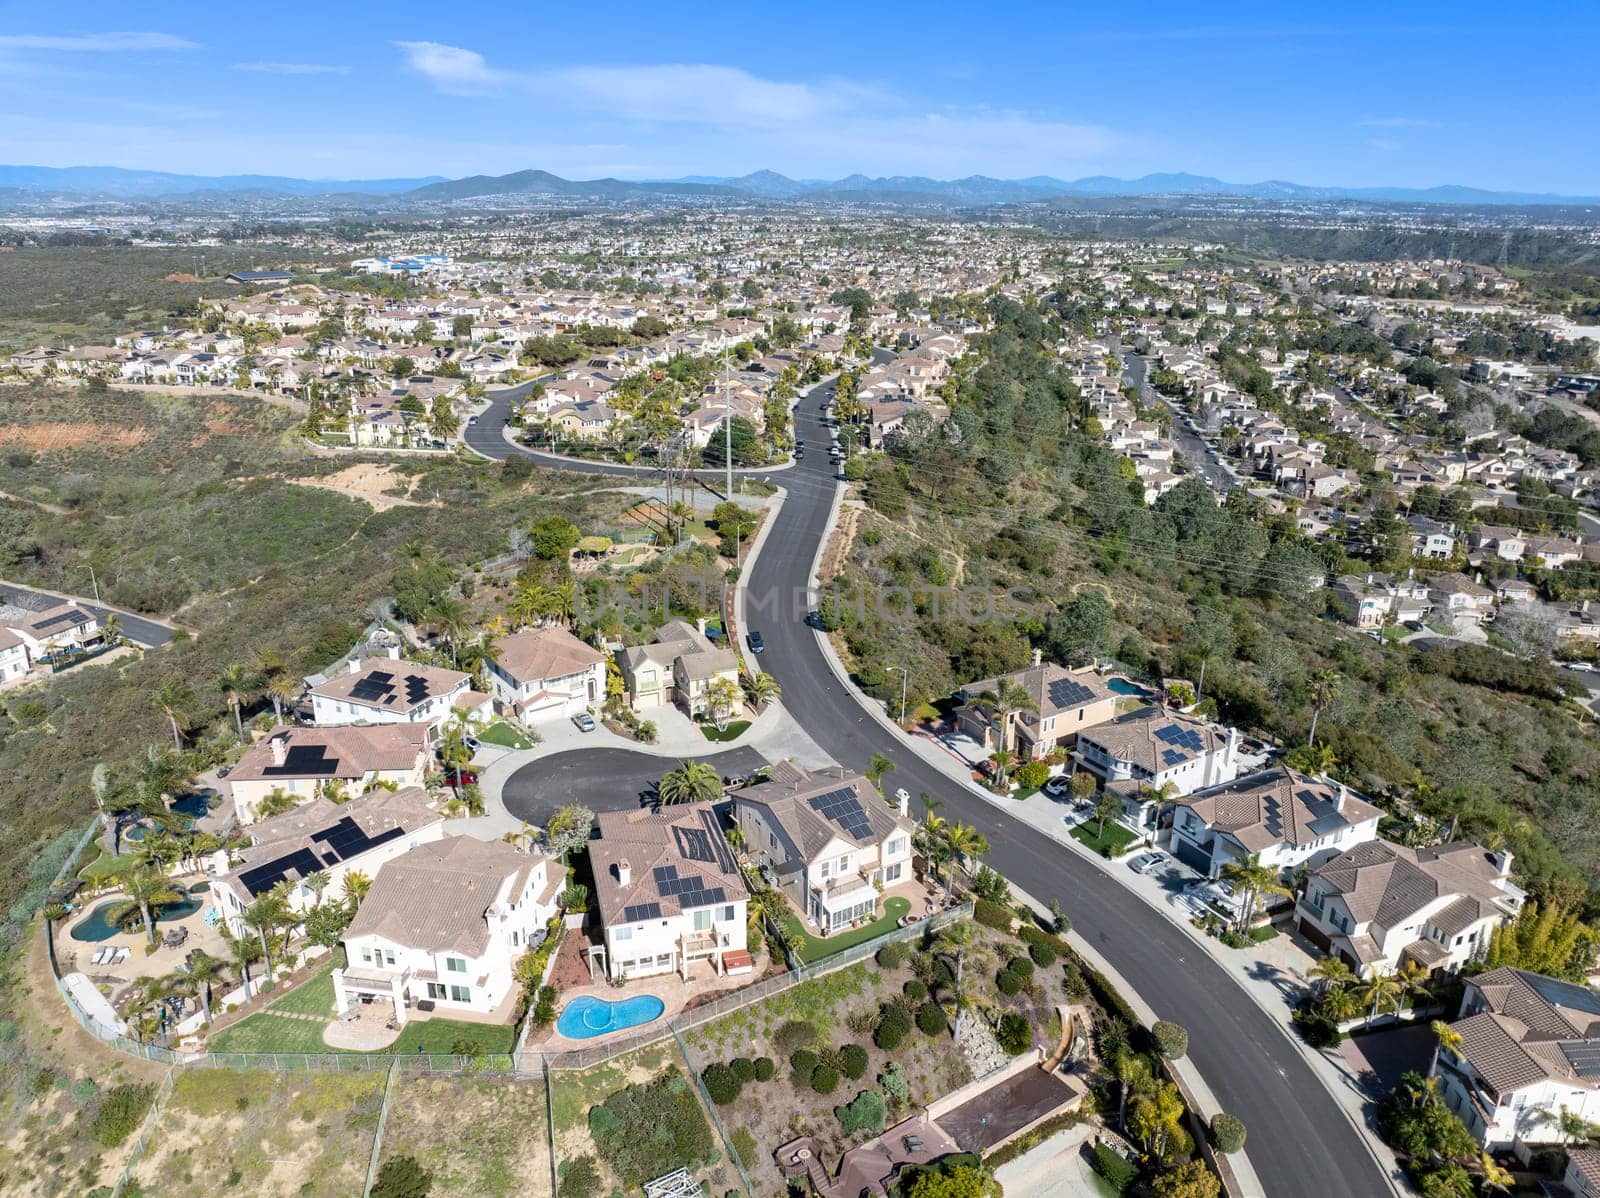 Aerial view of middle class subdivision neighborhood with residential condos and houses in San Diego, California, USA.